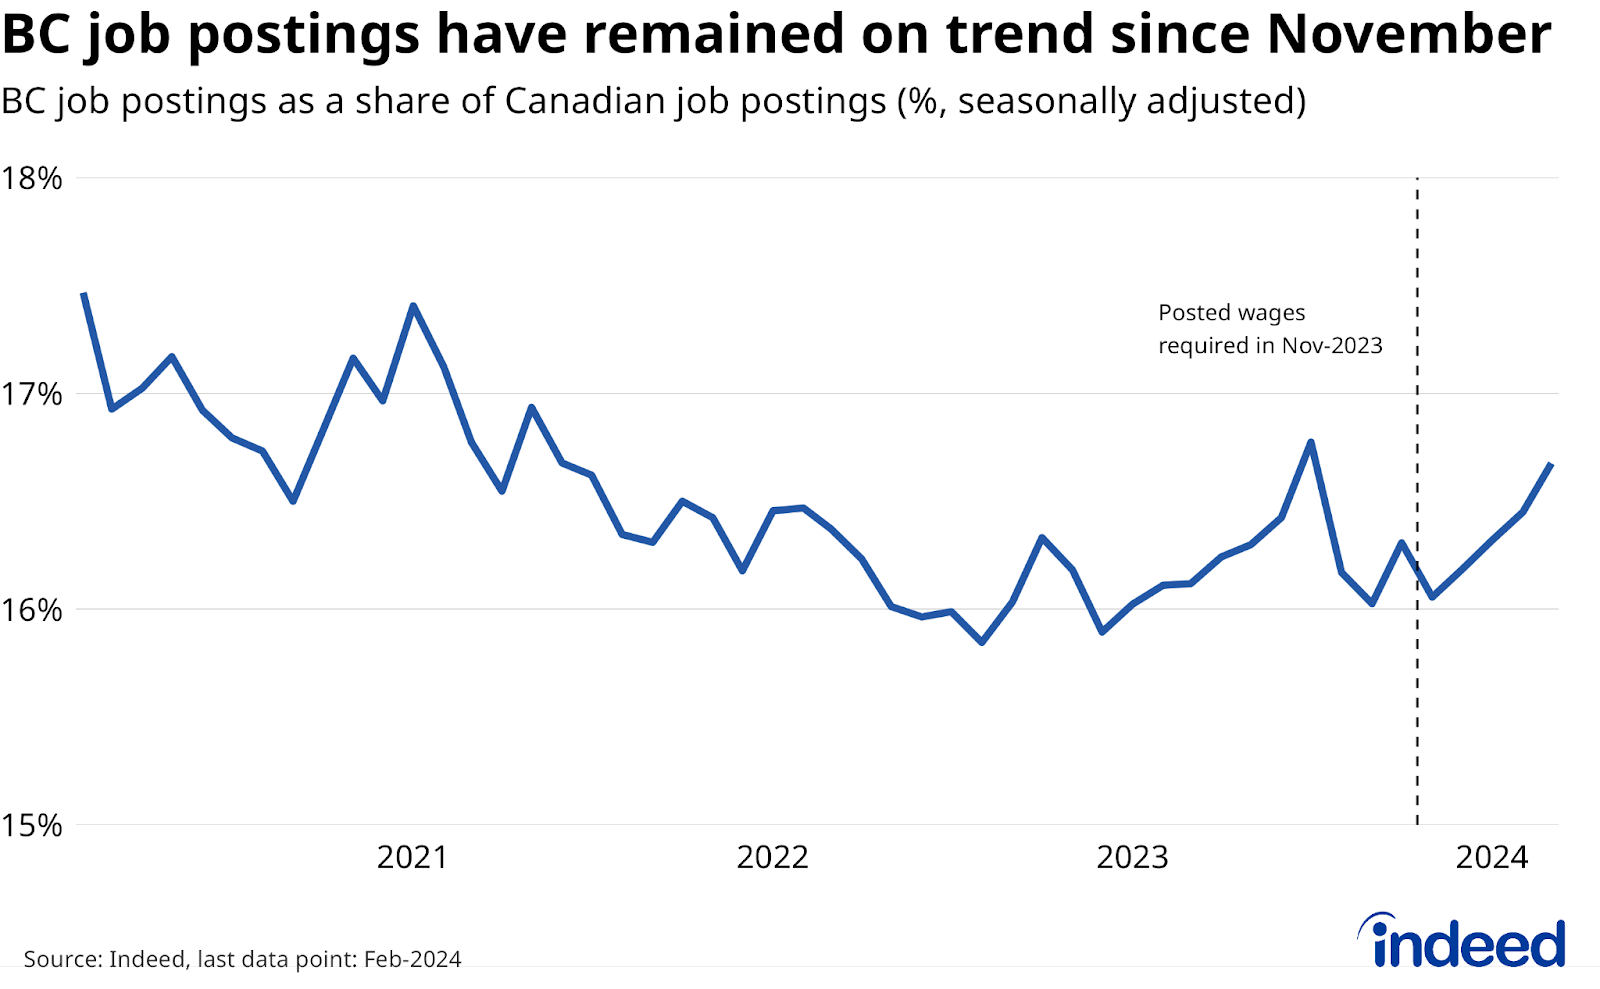 Line chart titled “BC job postings have remained on trend since November,” shows the share of Canadian job postings located in BC between February 2020 and February 2024. The BC share of Canadian job postings has ticked up since November 2023. 